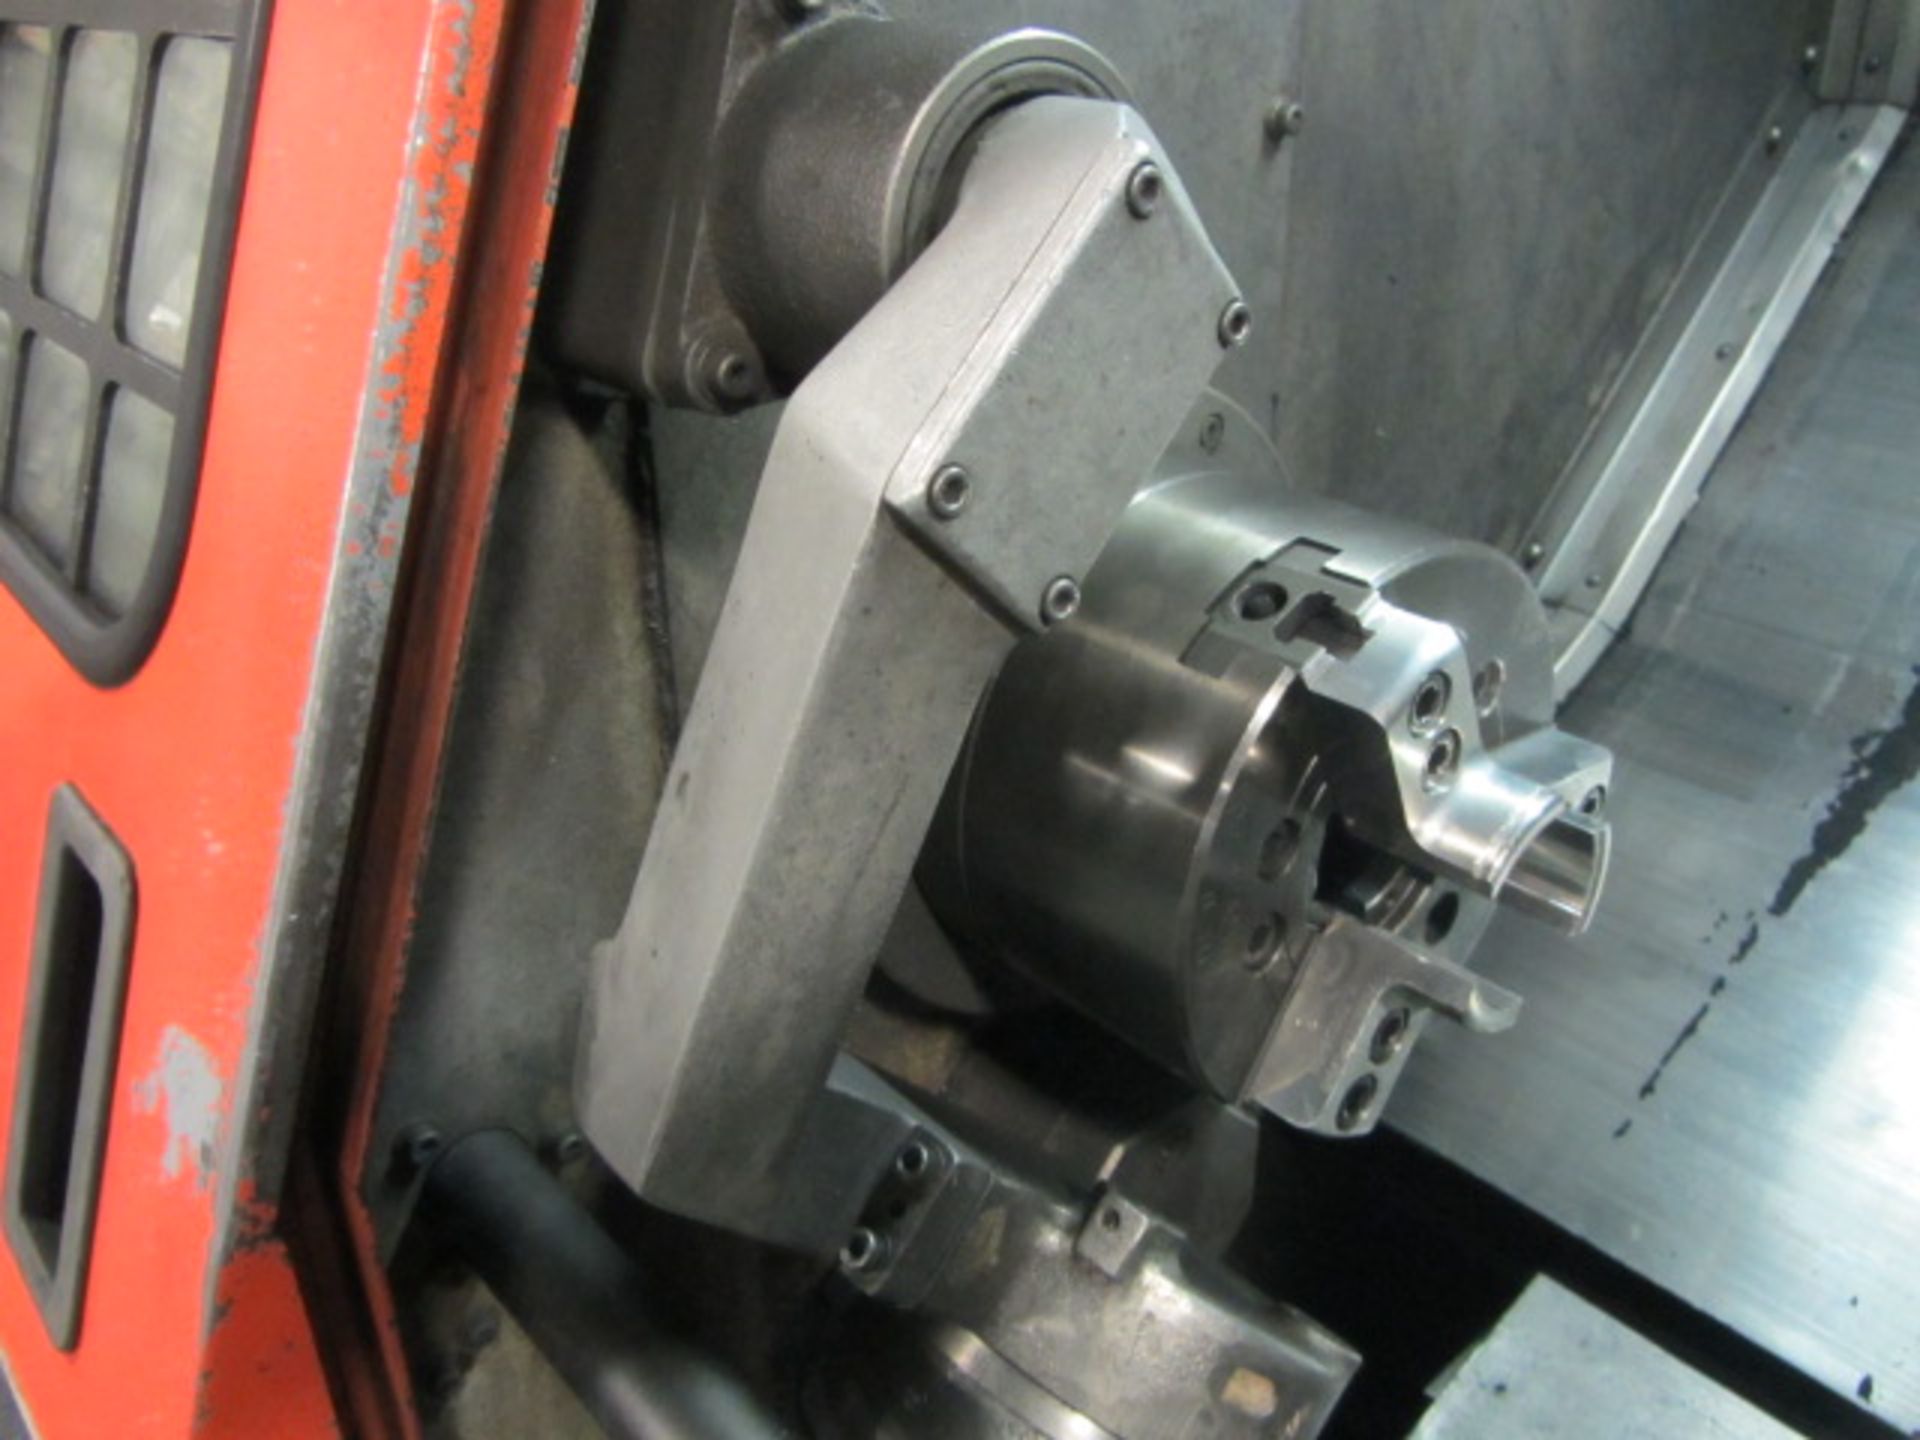 Mazak Super Quick Turn 10MS CNC Turning Center with Sub-Spindle, Milling, 6'' 3-Jaw Power Chuck, - Image 7 of 8